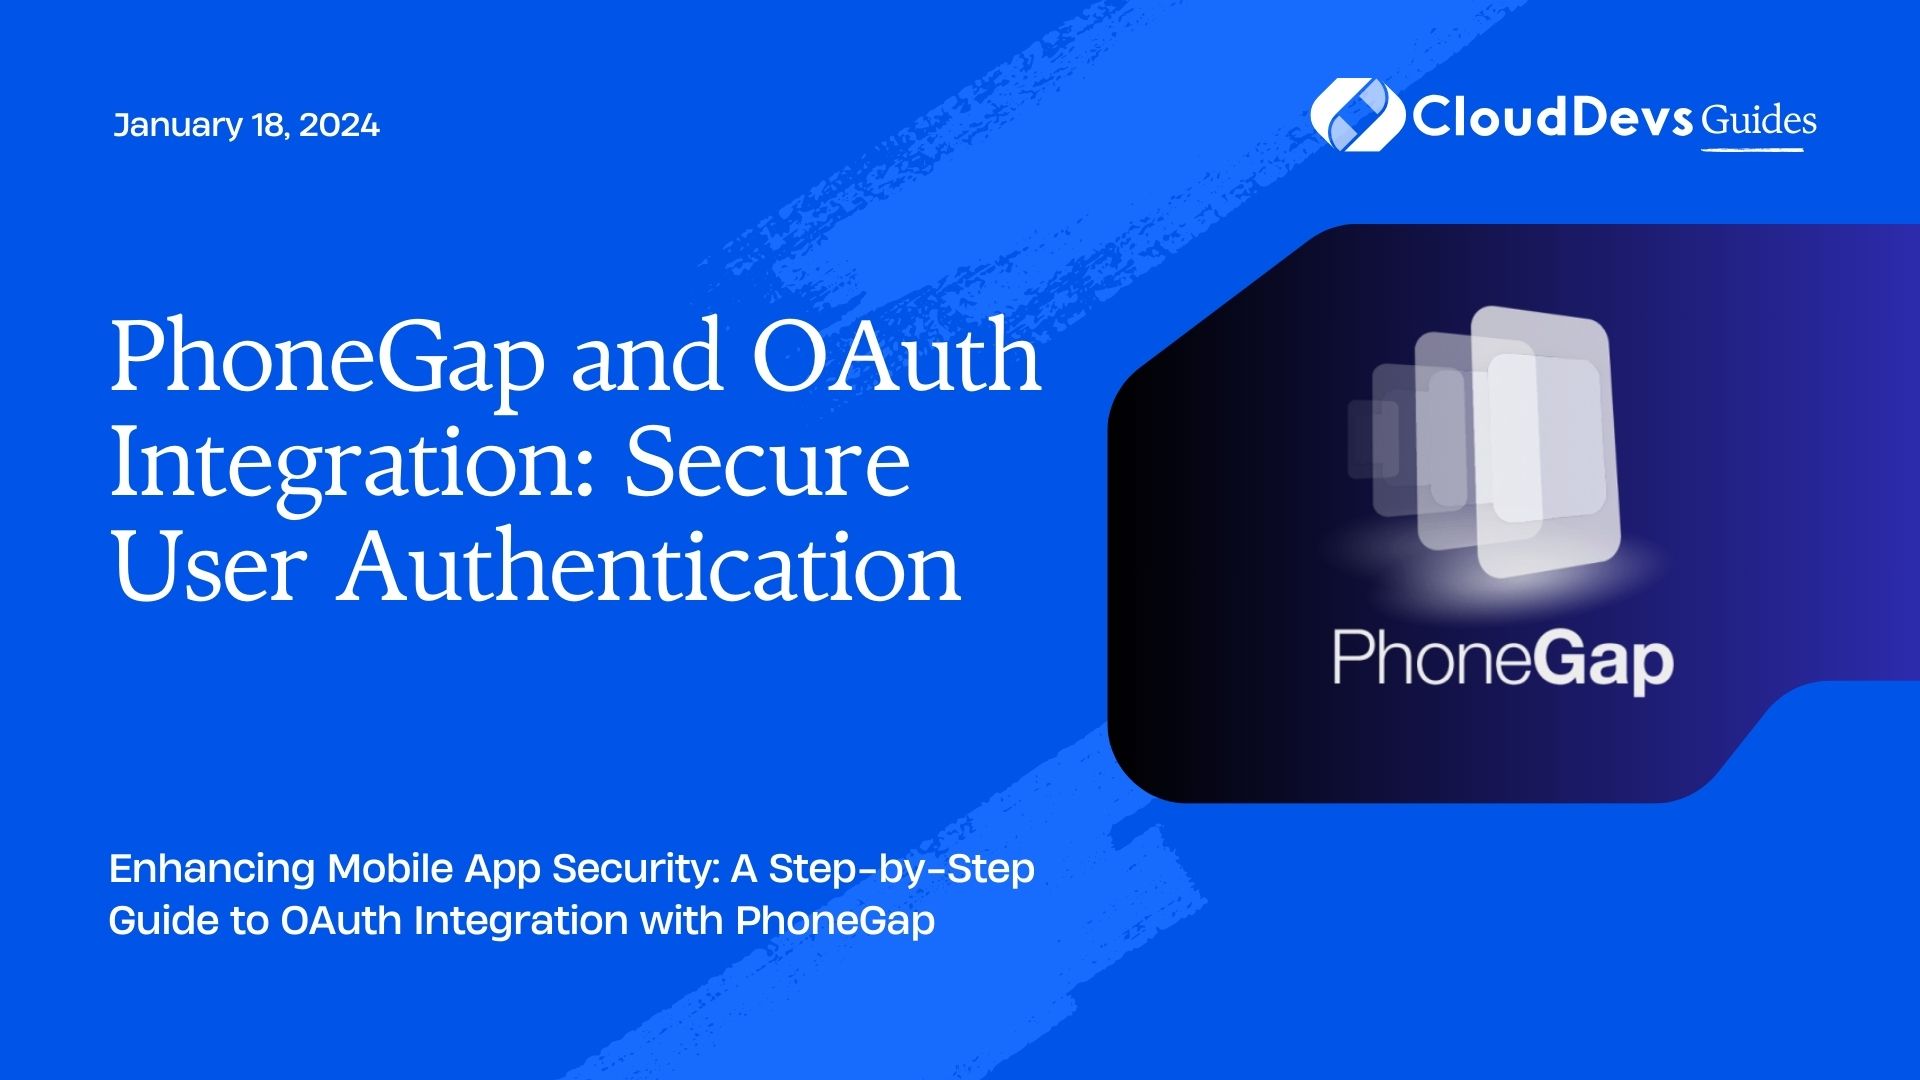 PhoneGap and OAuth Integration: Secure User Authentication